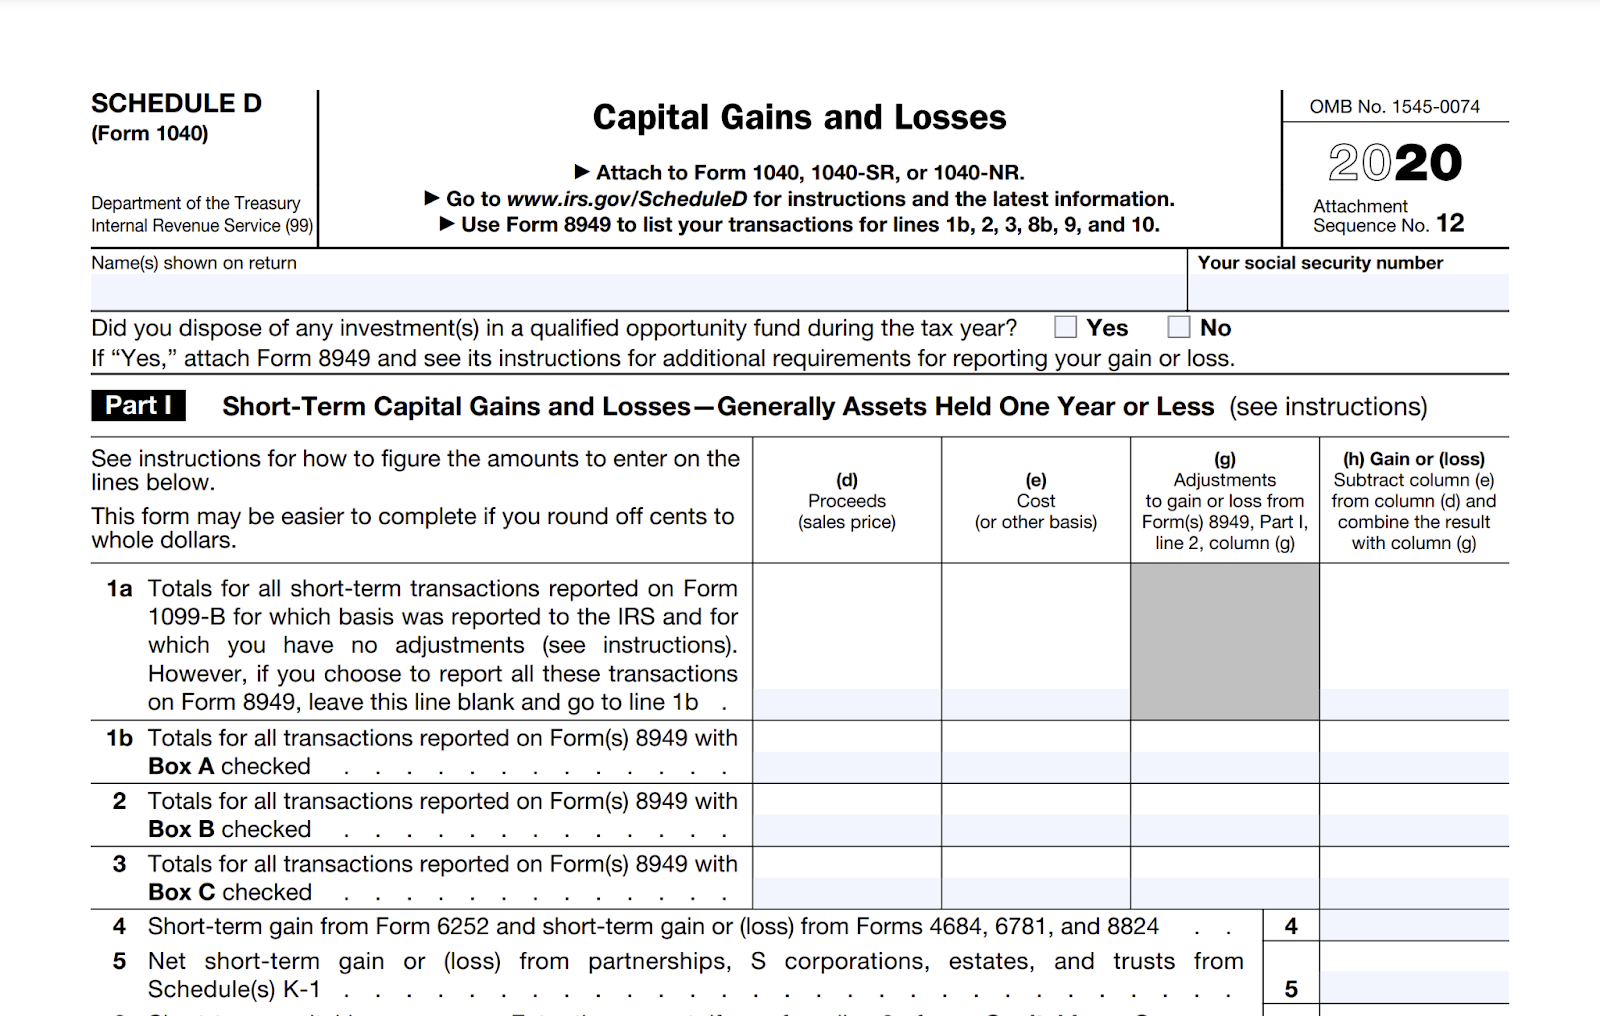 Screenshot of IRS Form 1040 Schedule D for Capital Gains and Losses